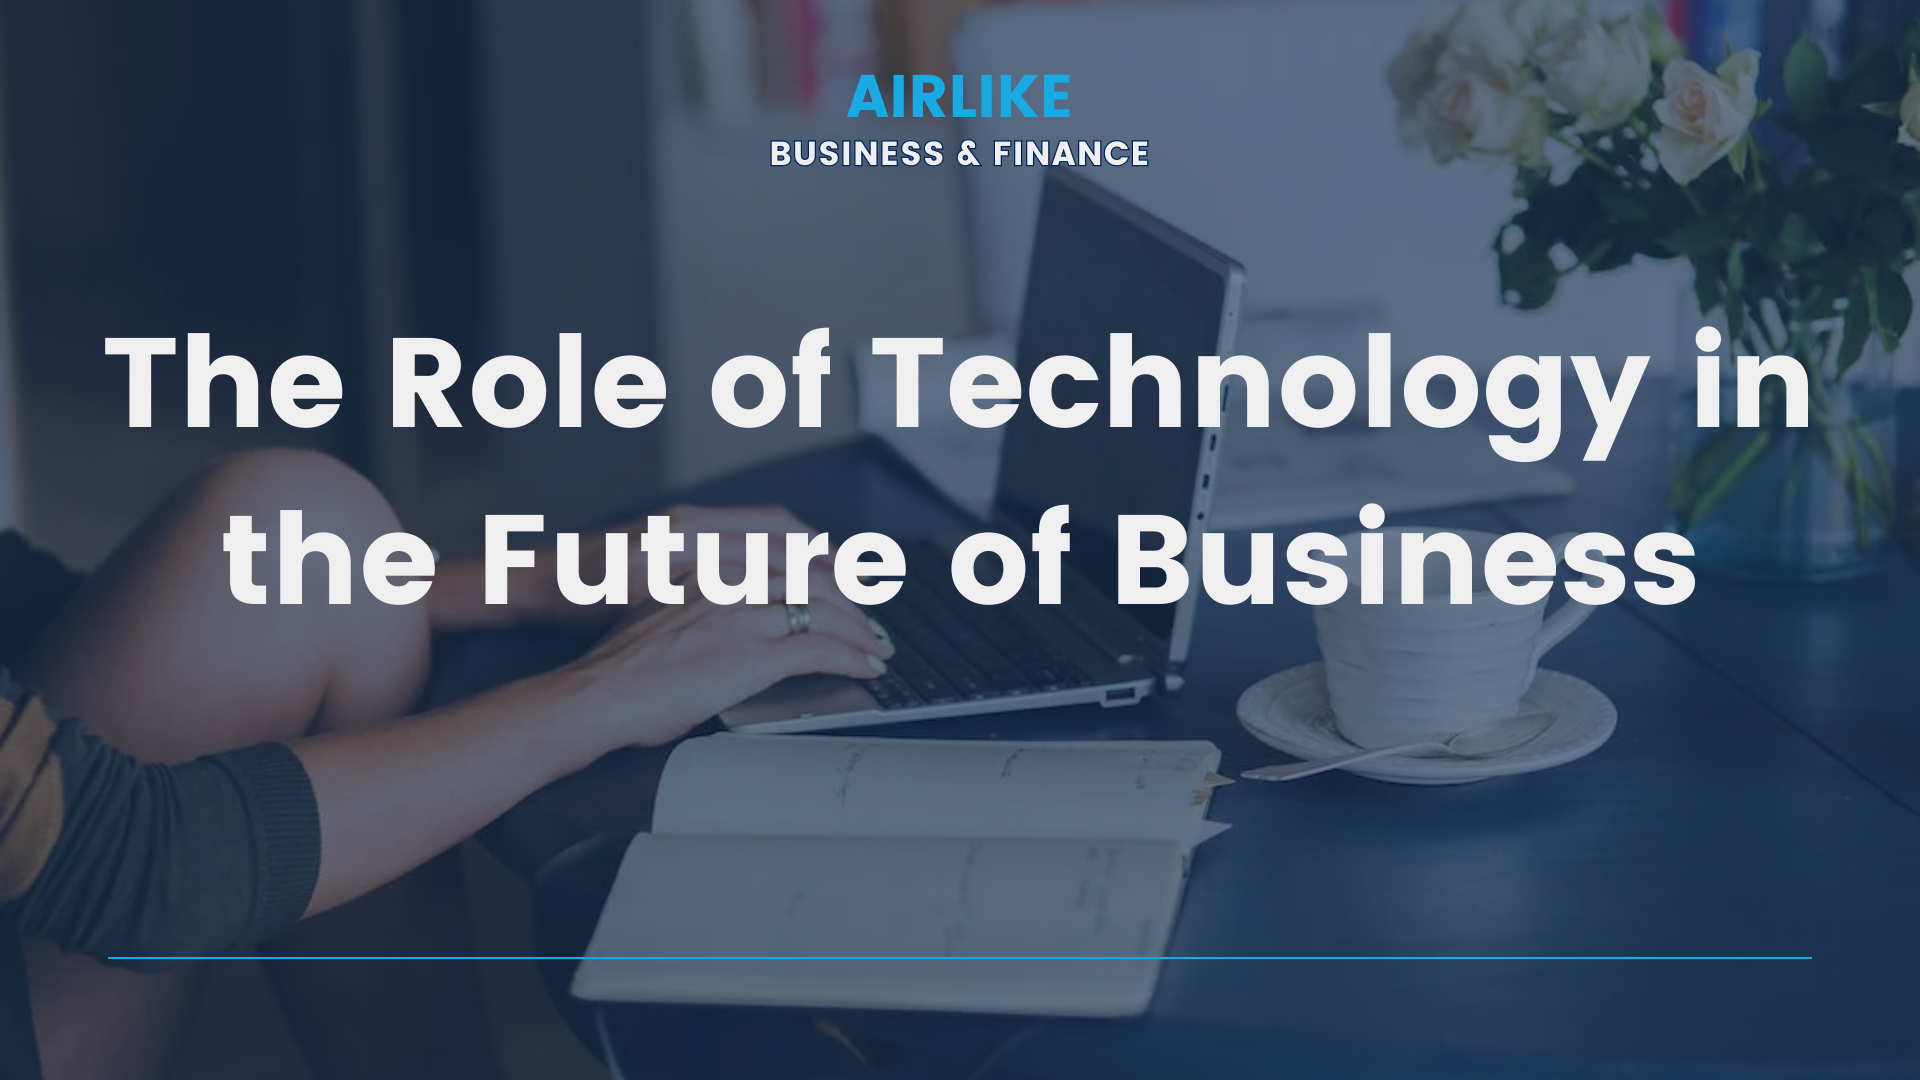 The Role of Technology in the Future of Business